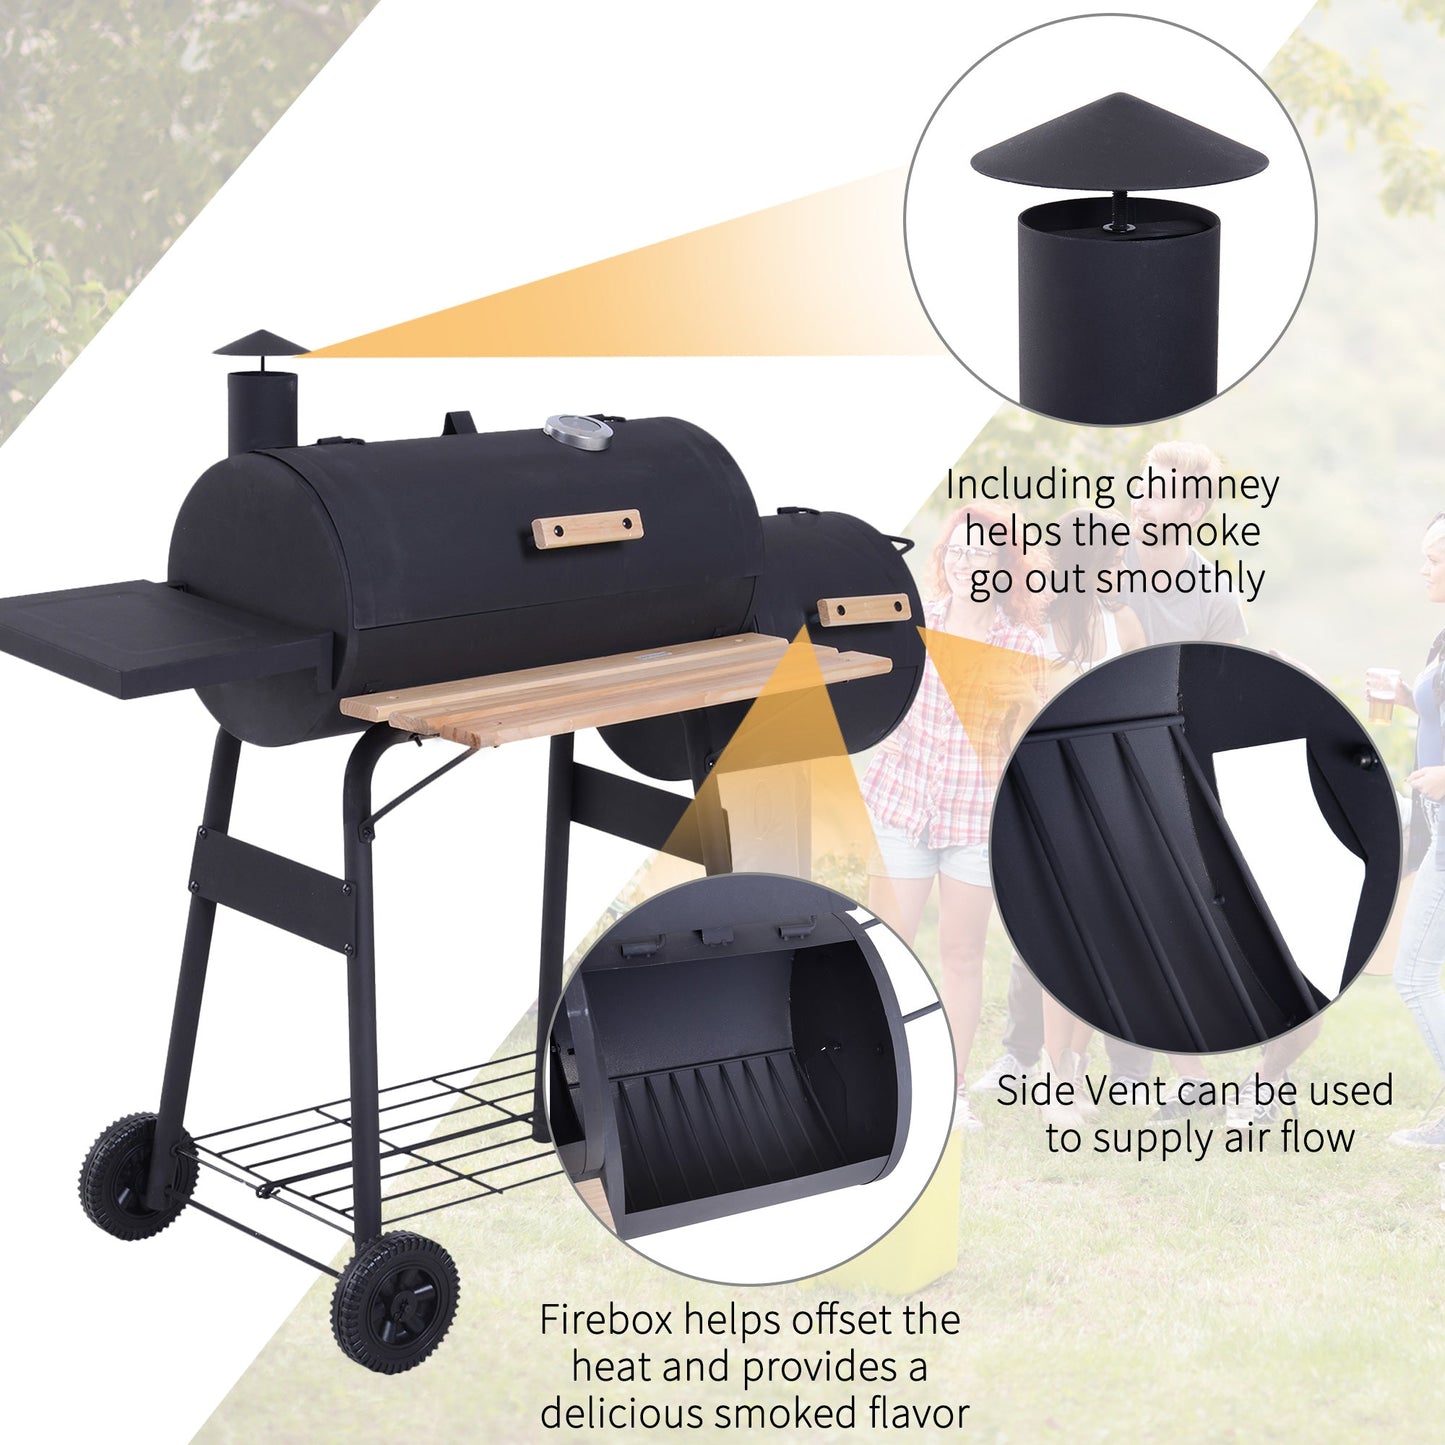 Outdoor and Garden-48" Charcoal BBQ Grill and Smoker Combo Steel Portable Backyard Charcoal BBQ Grill with Wheels - Outdoor Style Company